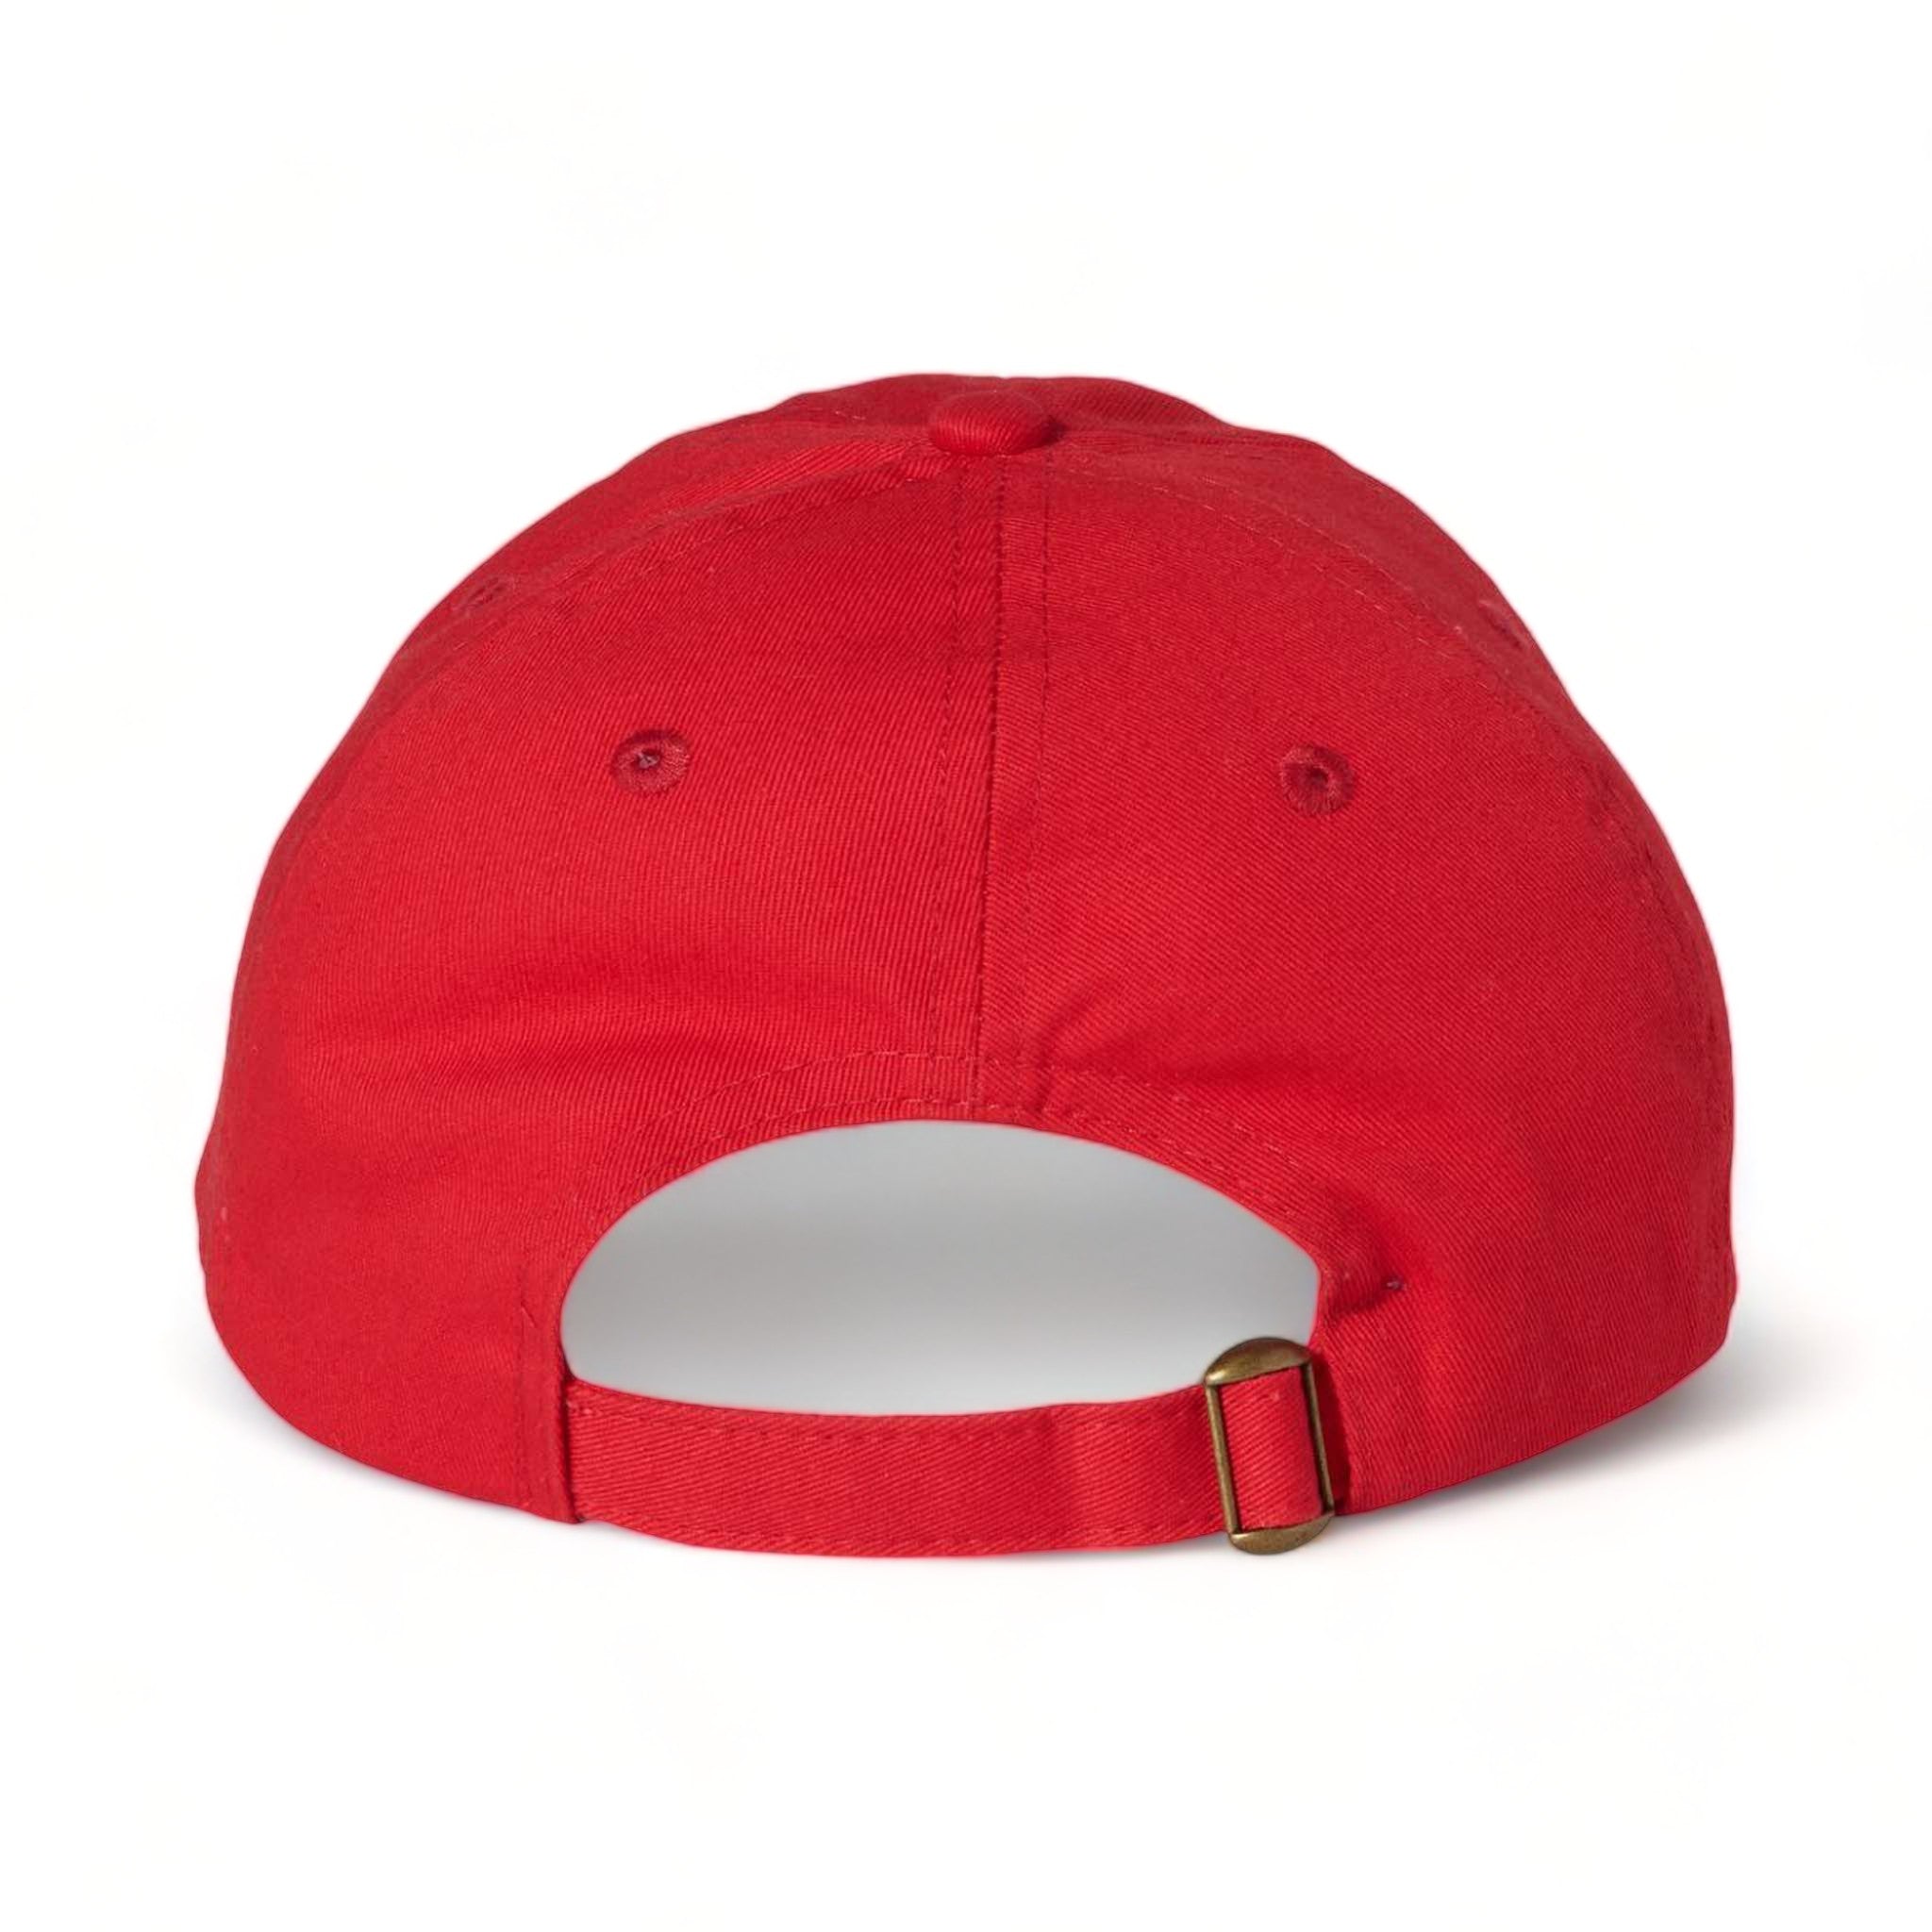 Back view of Valucap VC300A custom hat in red